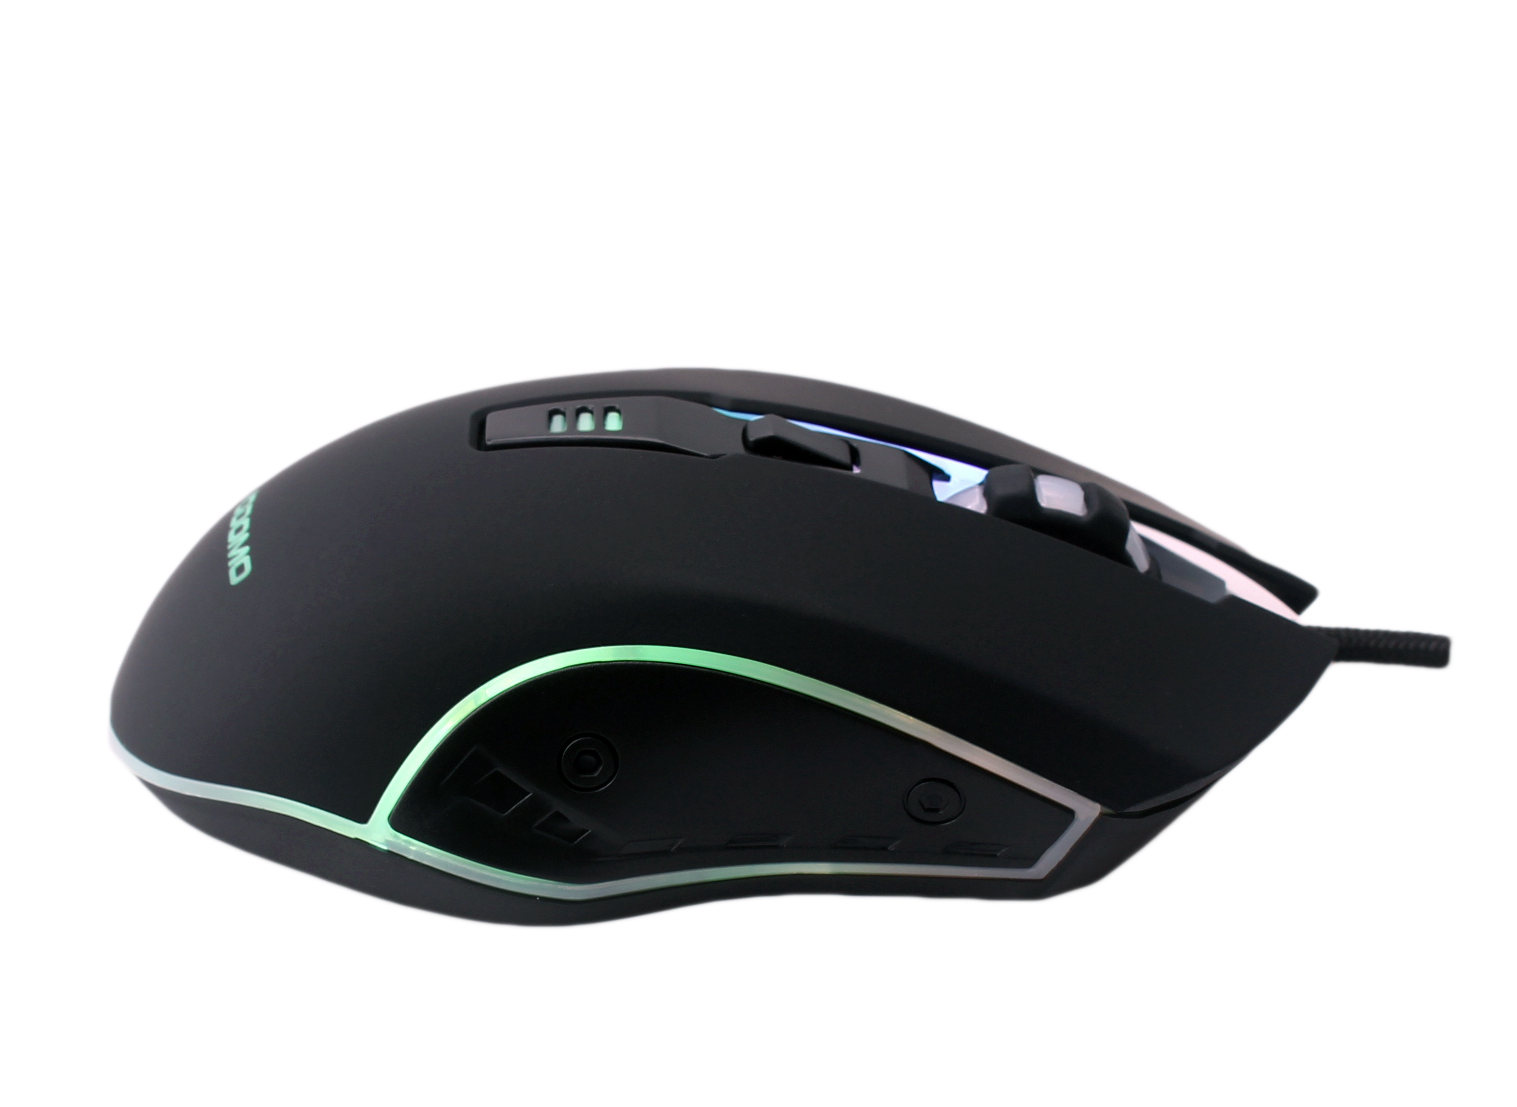 6D Gaming Mouse with Rubber Oil,800/1200/1600/2400 DPI,